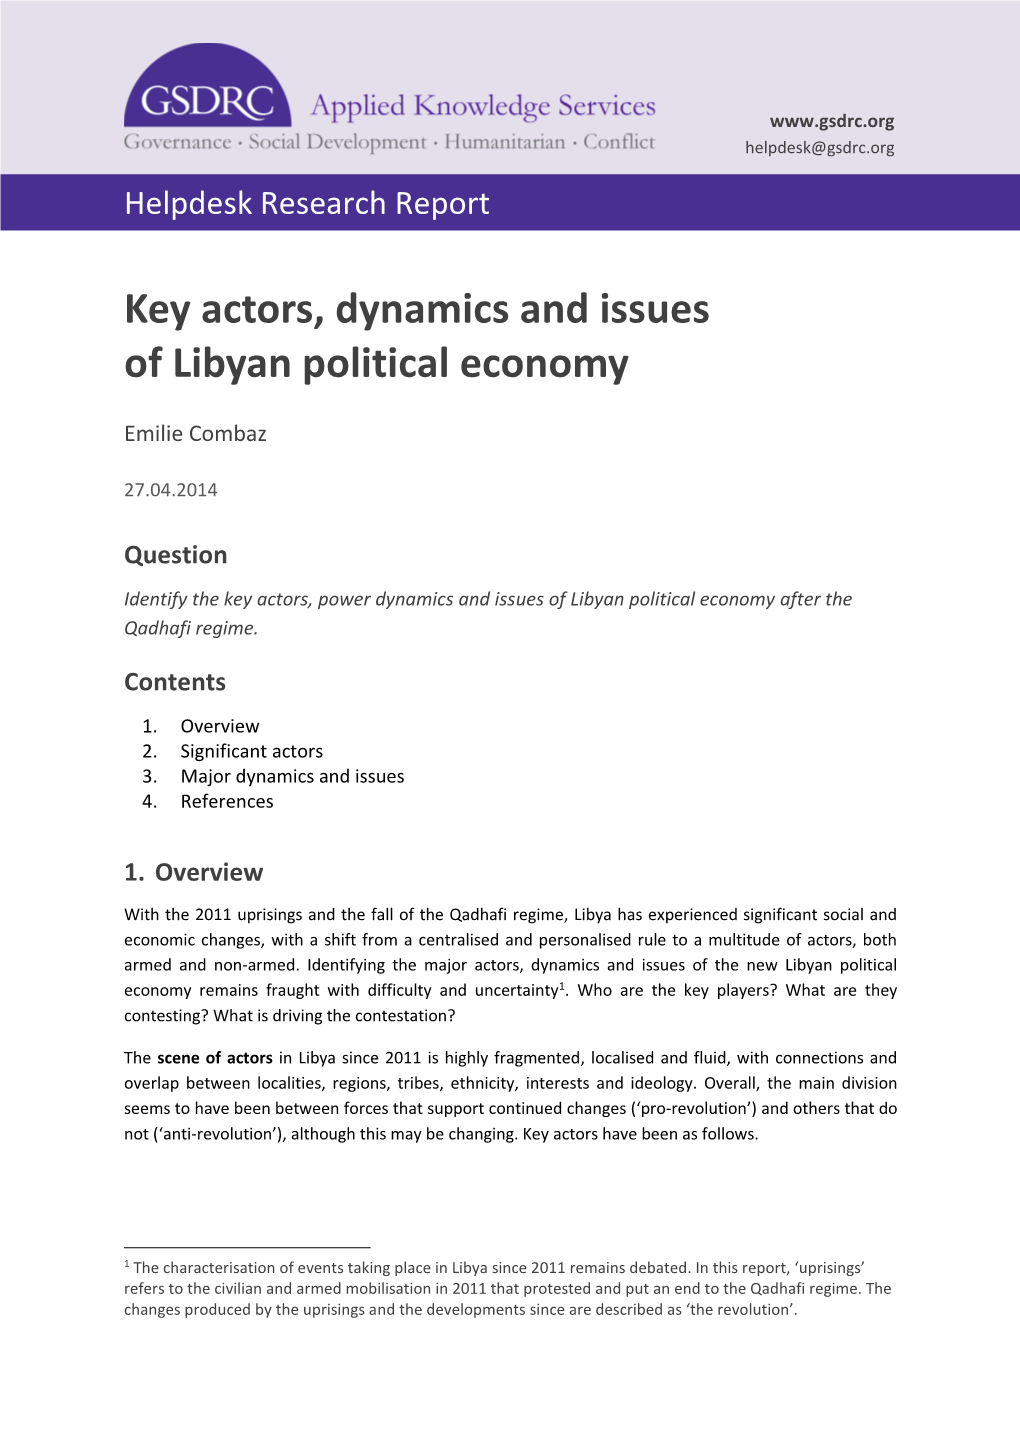 Key Actors, Dynamics and Issues of Libyan Political Economy